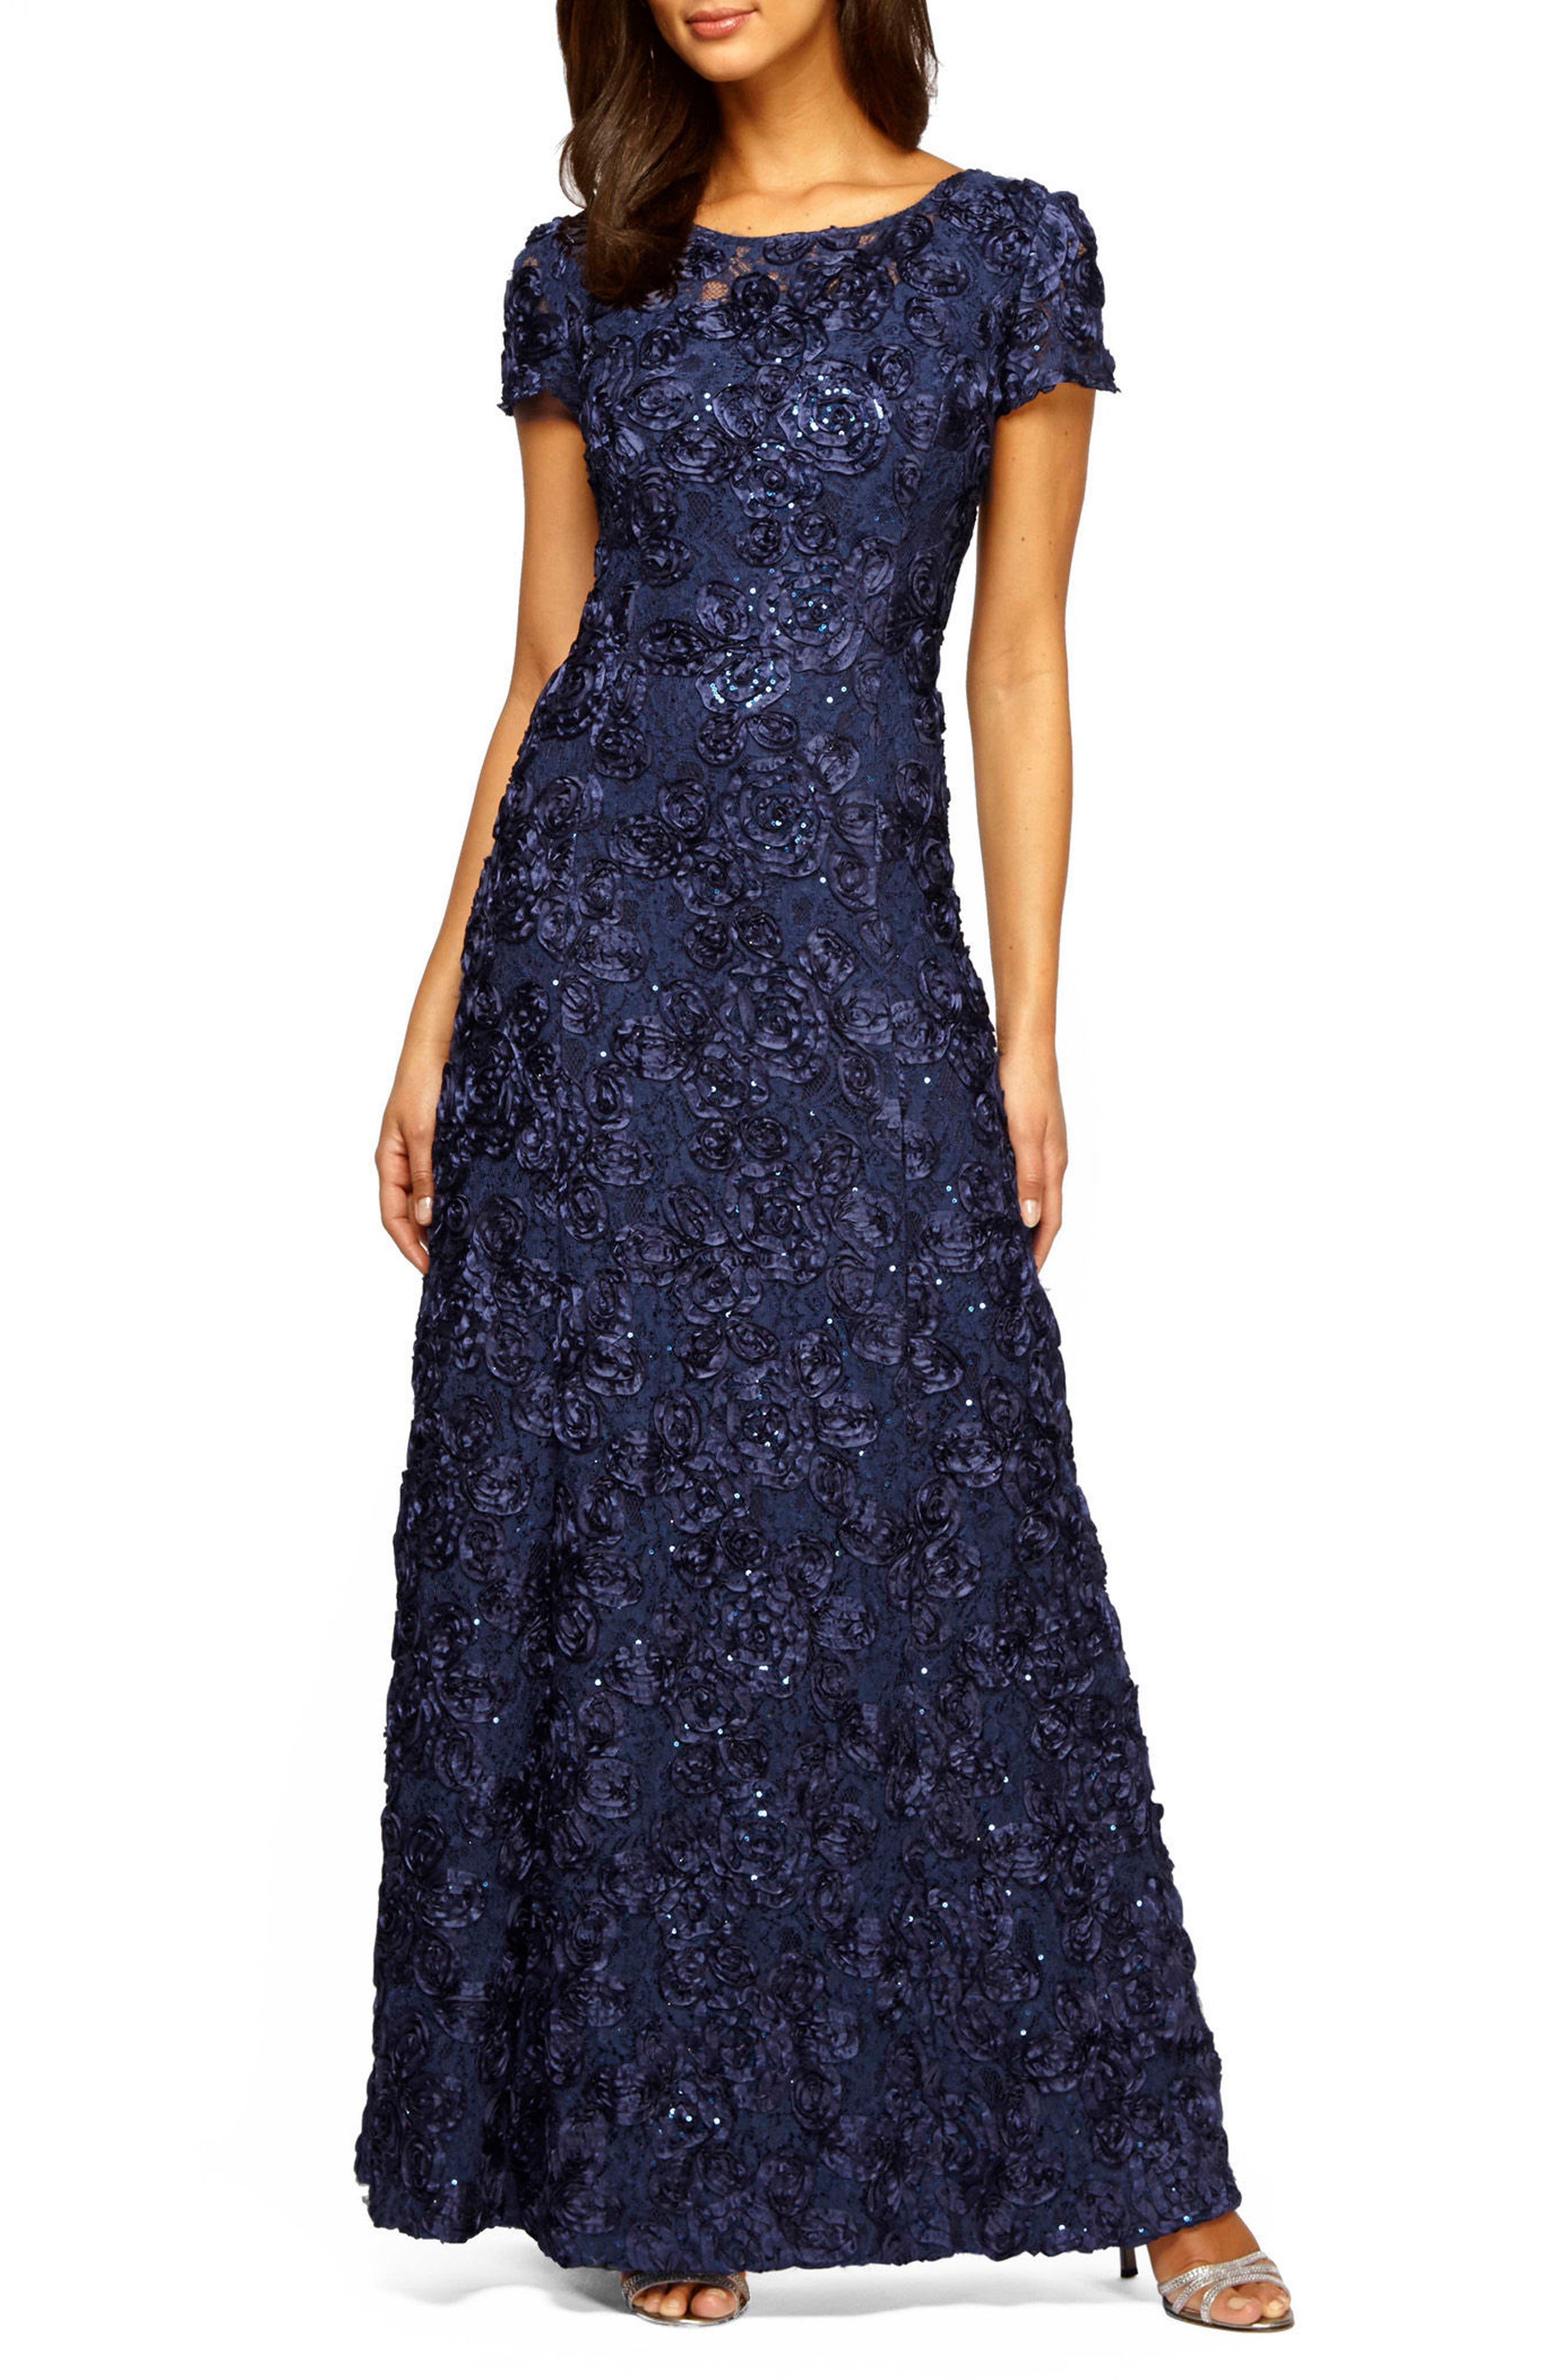 Sequined Dresses Champagne Gold Navy Blue Floor Length Party Dresses 